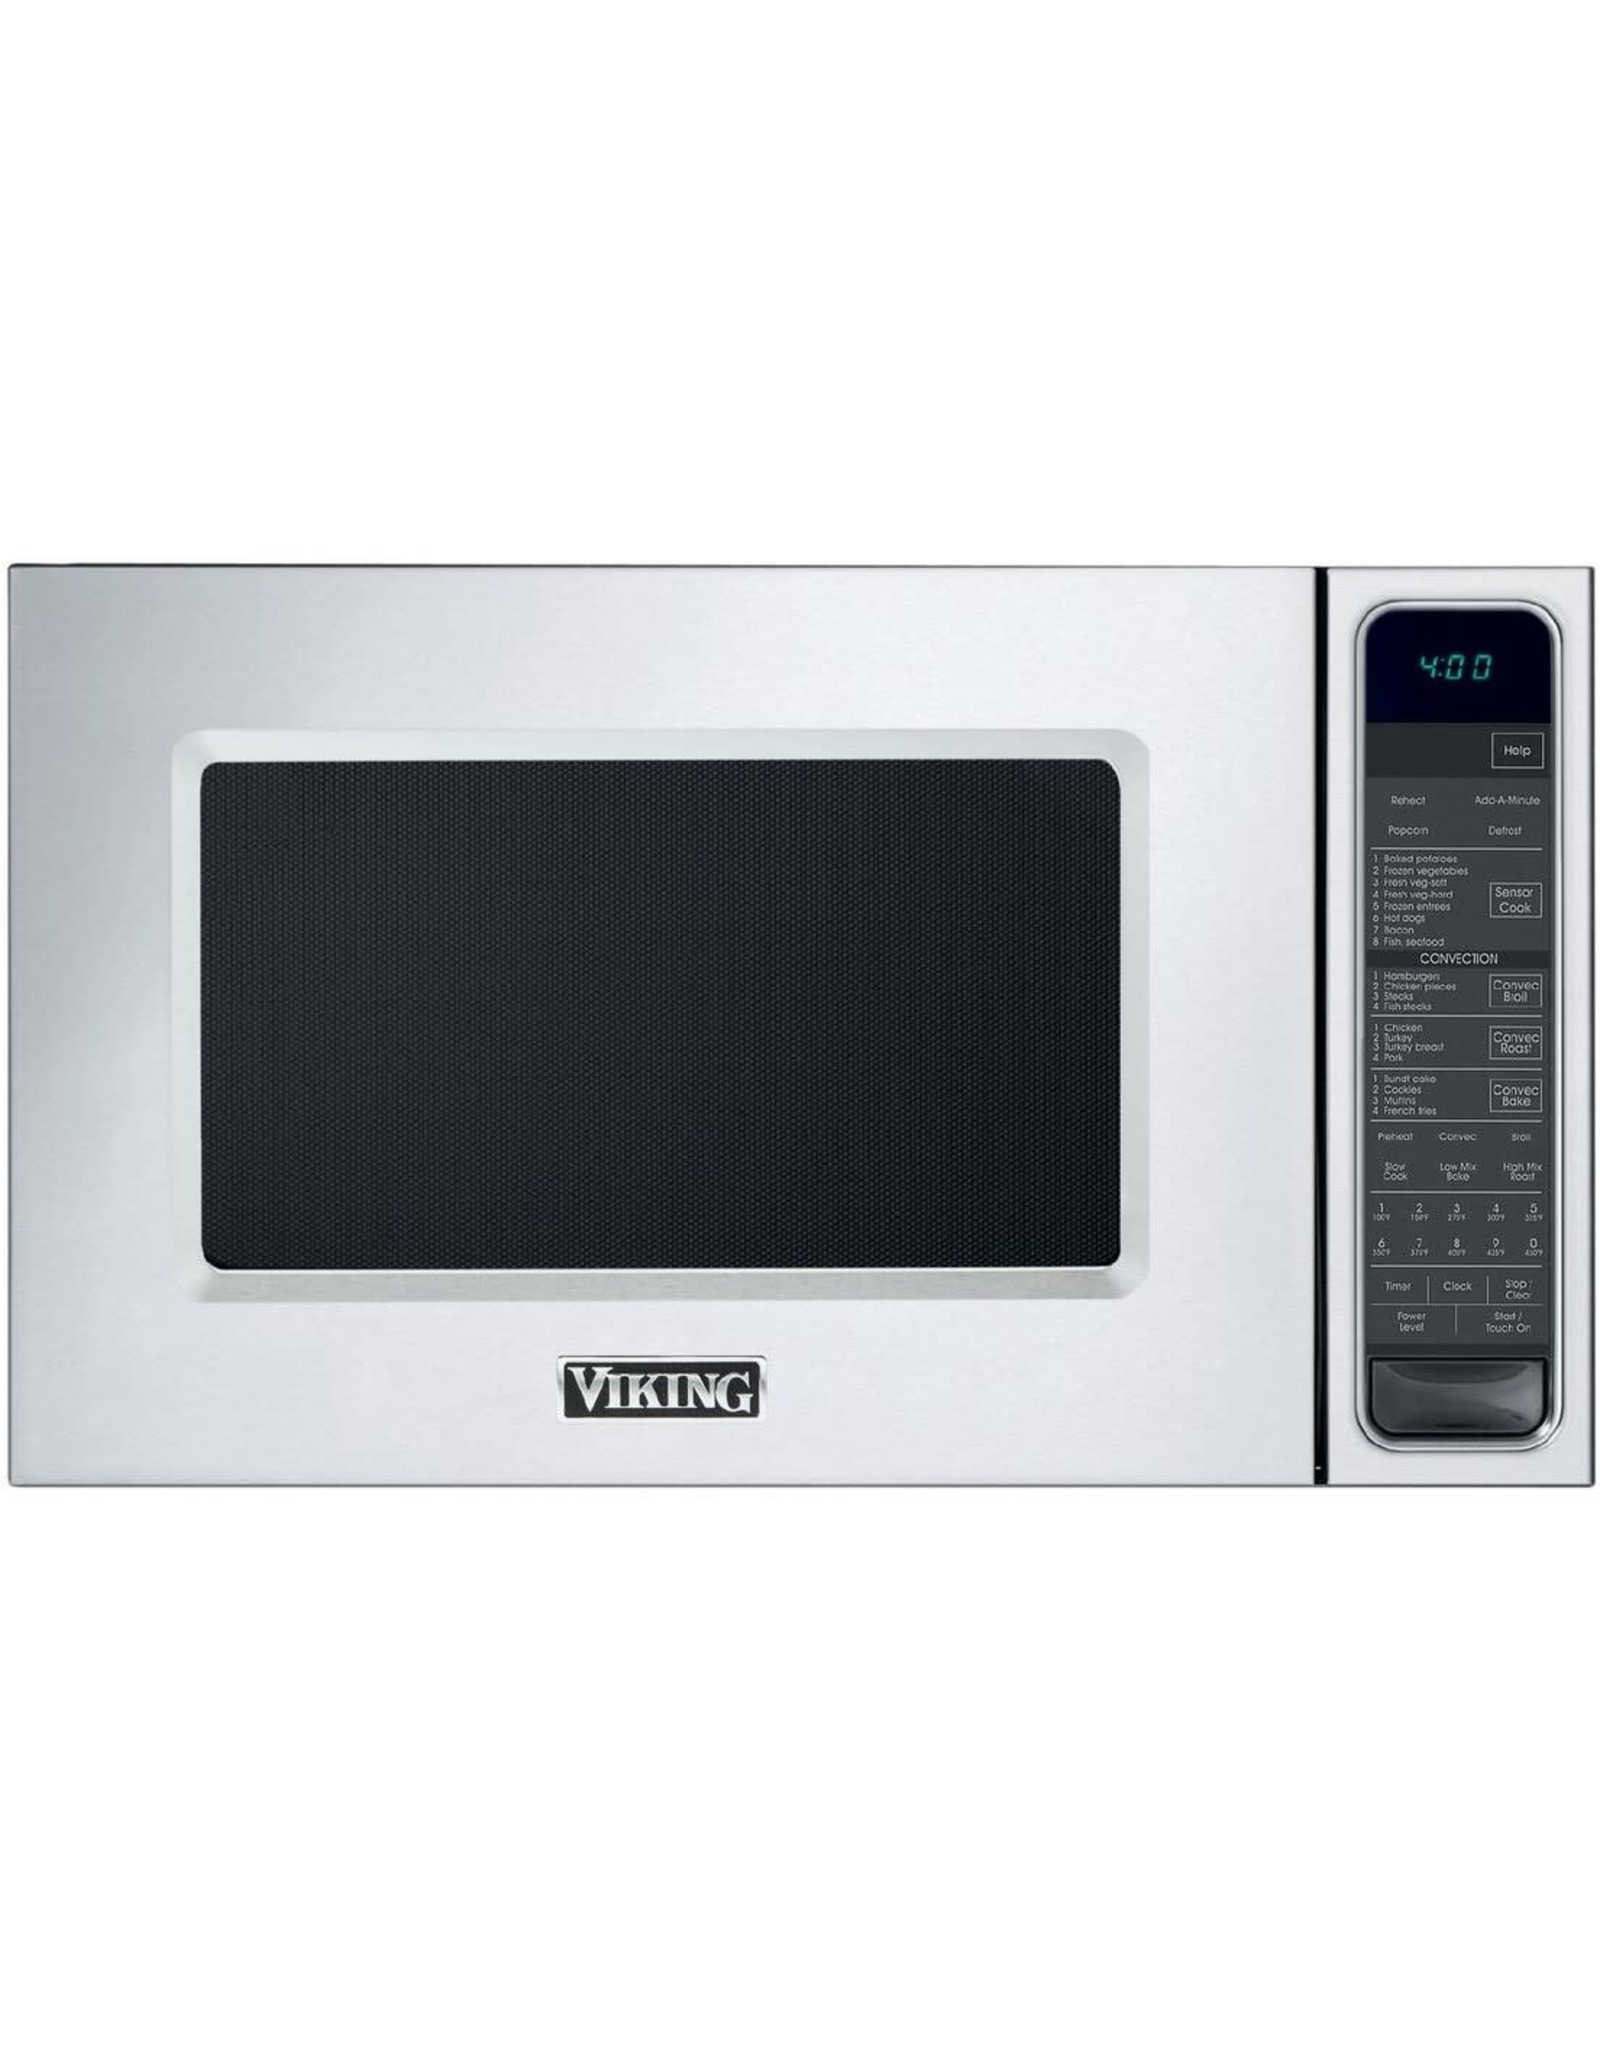 viking VMOC506SS 1.5 cu. ft. Built-In Microwave Oven with 4 Convection Settings, Instant Sensor Settings, Add-A-Minute and Interior Light: Stainless Steel